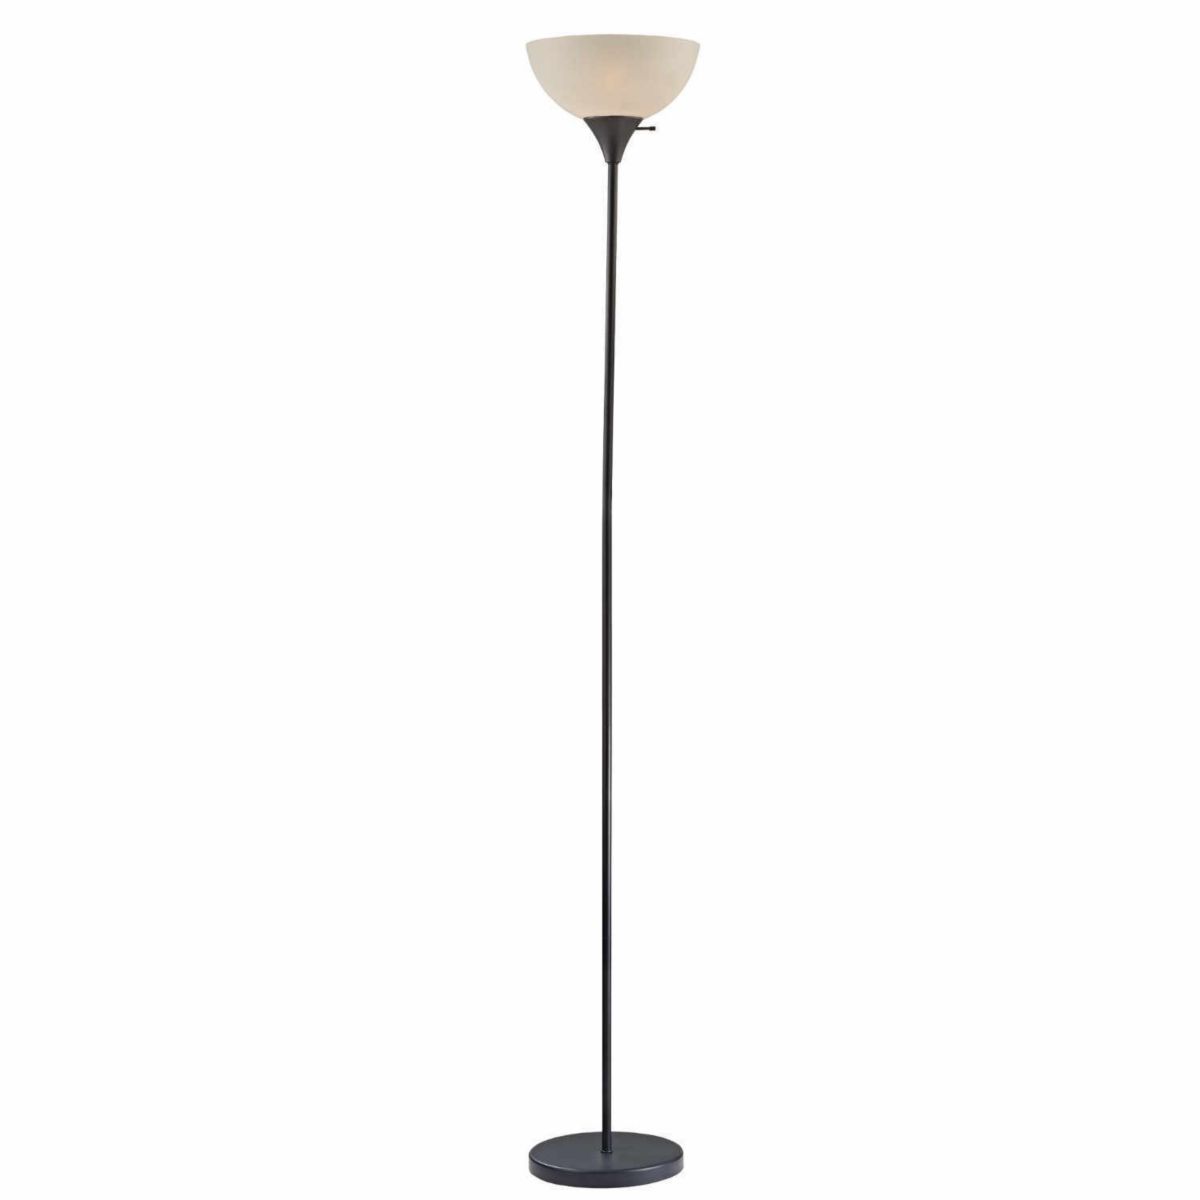 Floor Lamp By Lightaccents Standing Pole Light with White Lamp Shade LIGHTACCENTS